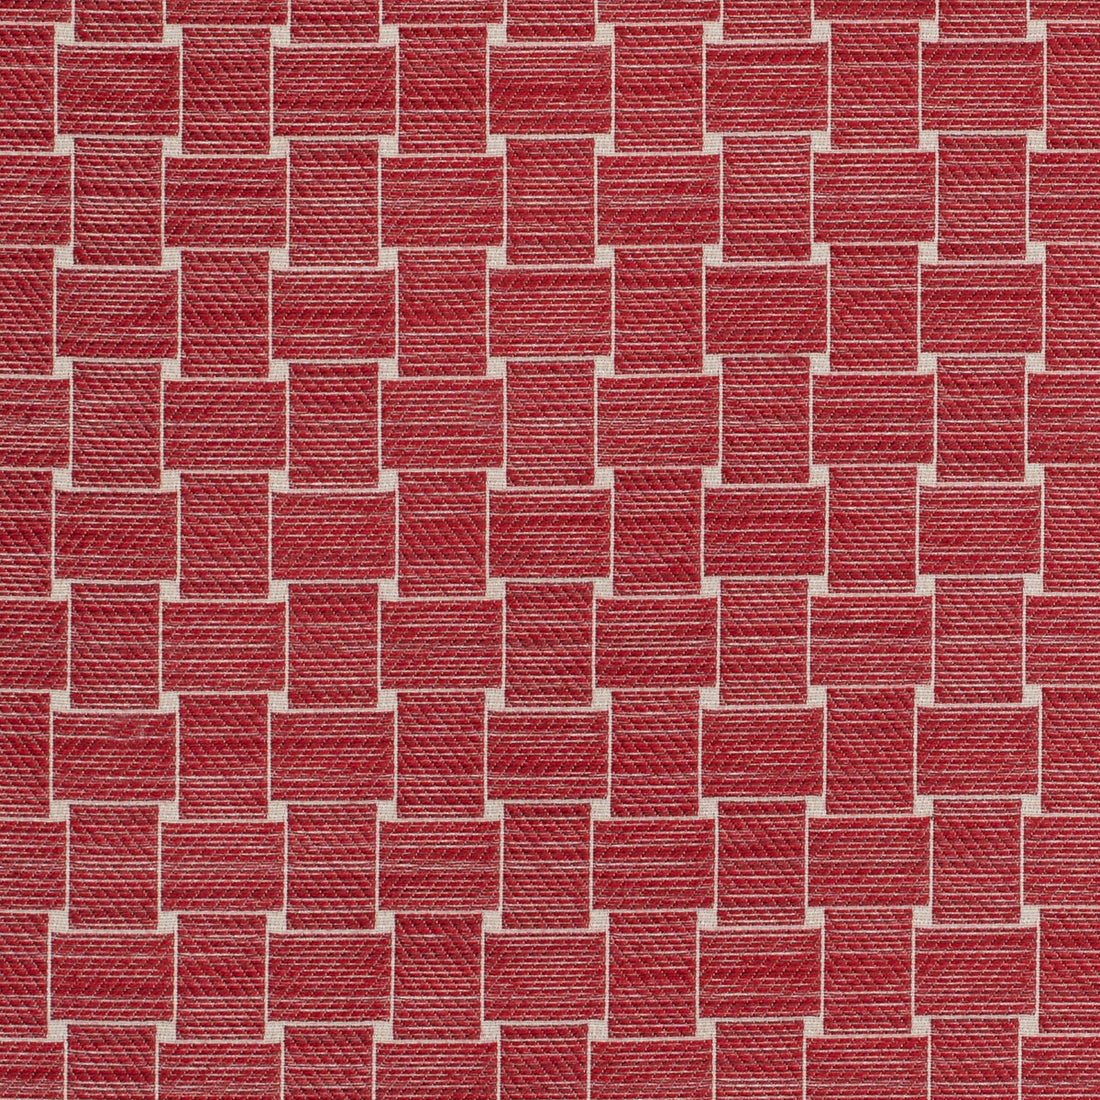 Beaumois Woven fabric in red color - pattern 8020108.19.0 - by Brunschwig &amp; Fils in the Granville Weaves collection